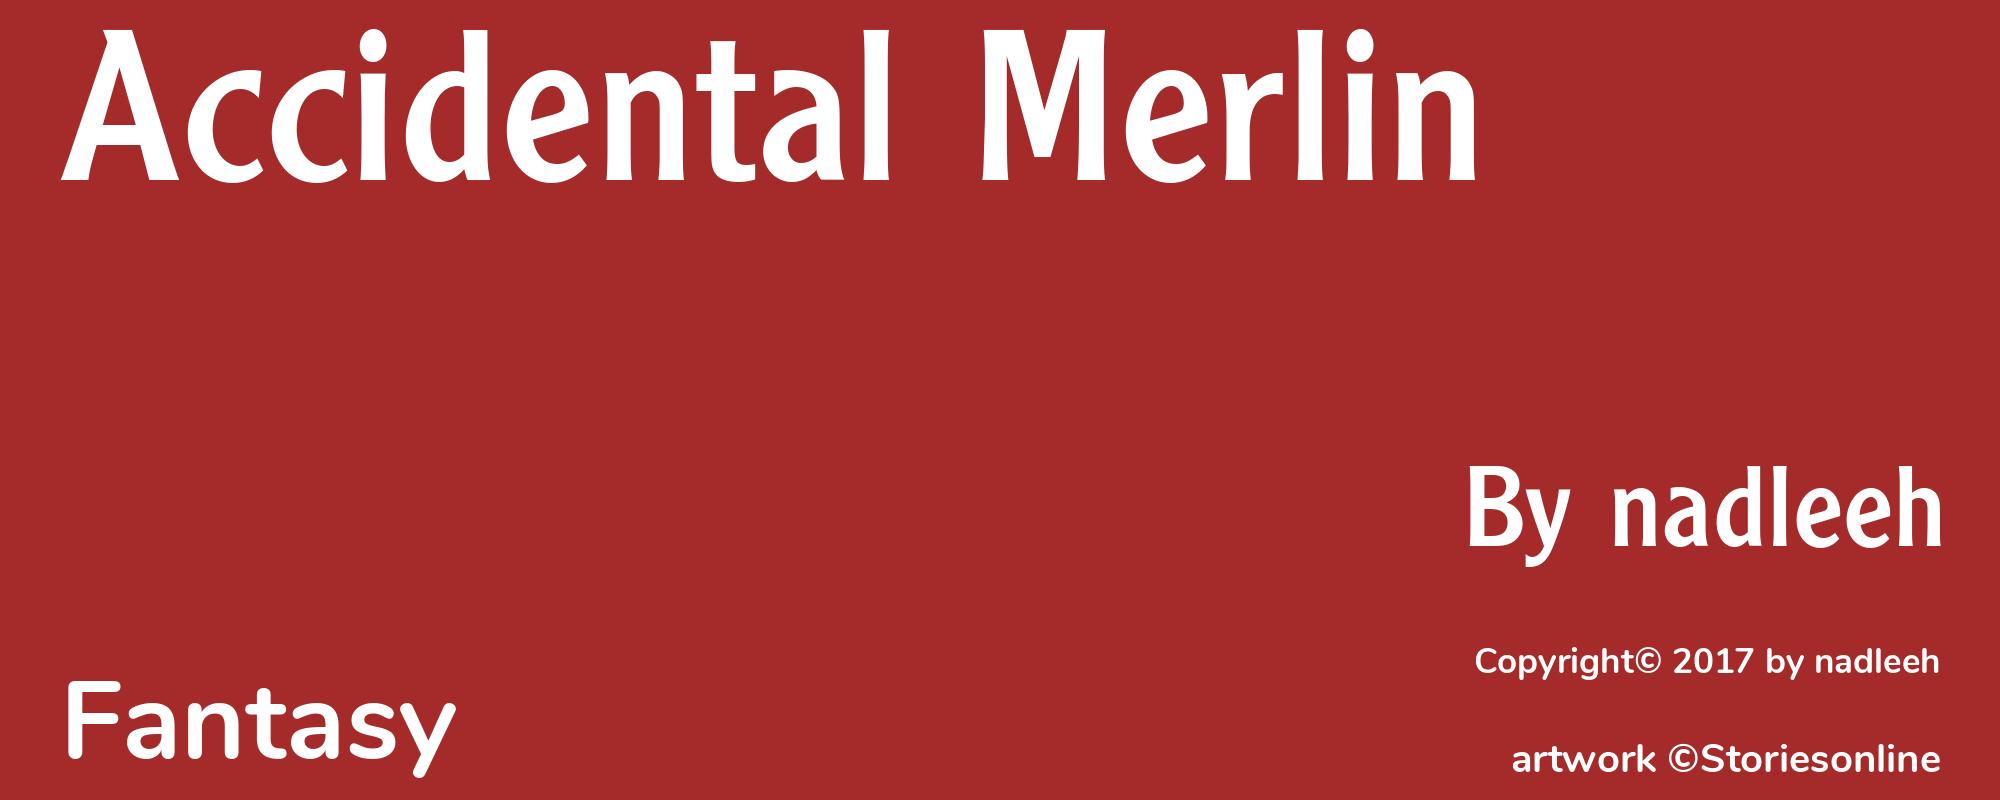 Accidental Merlin - Cover